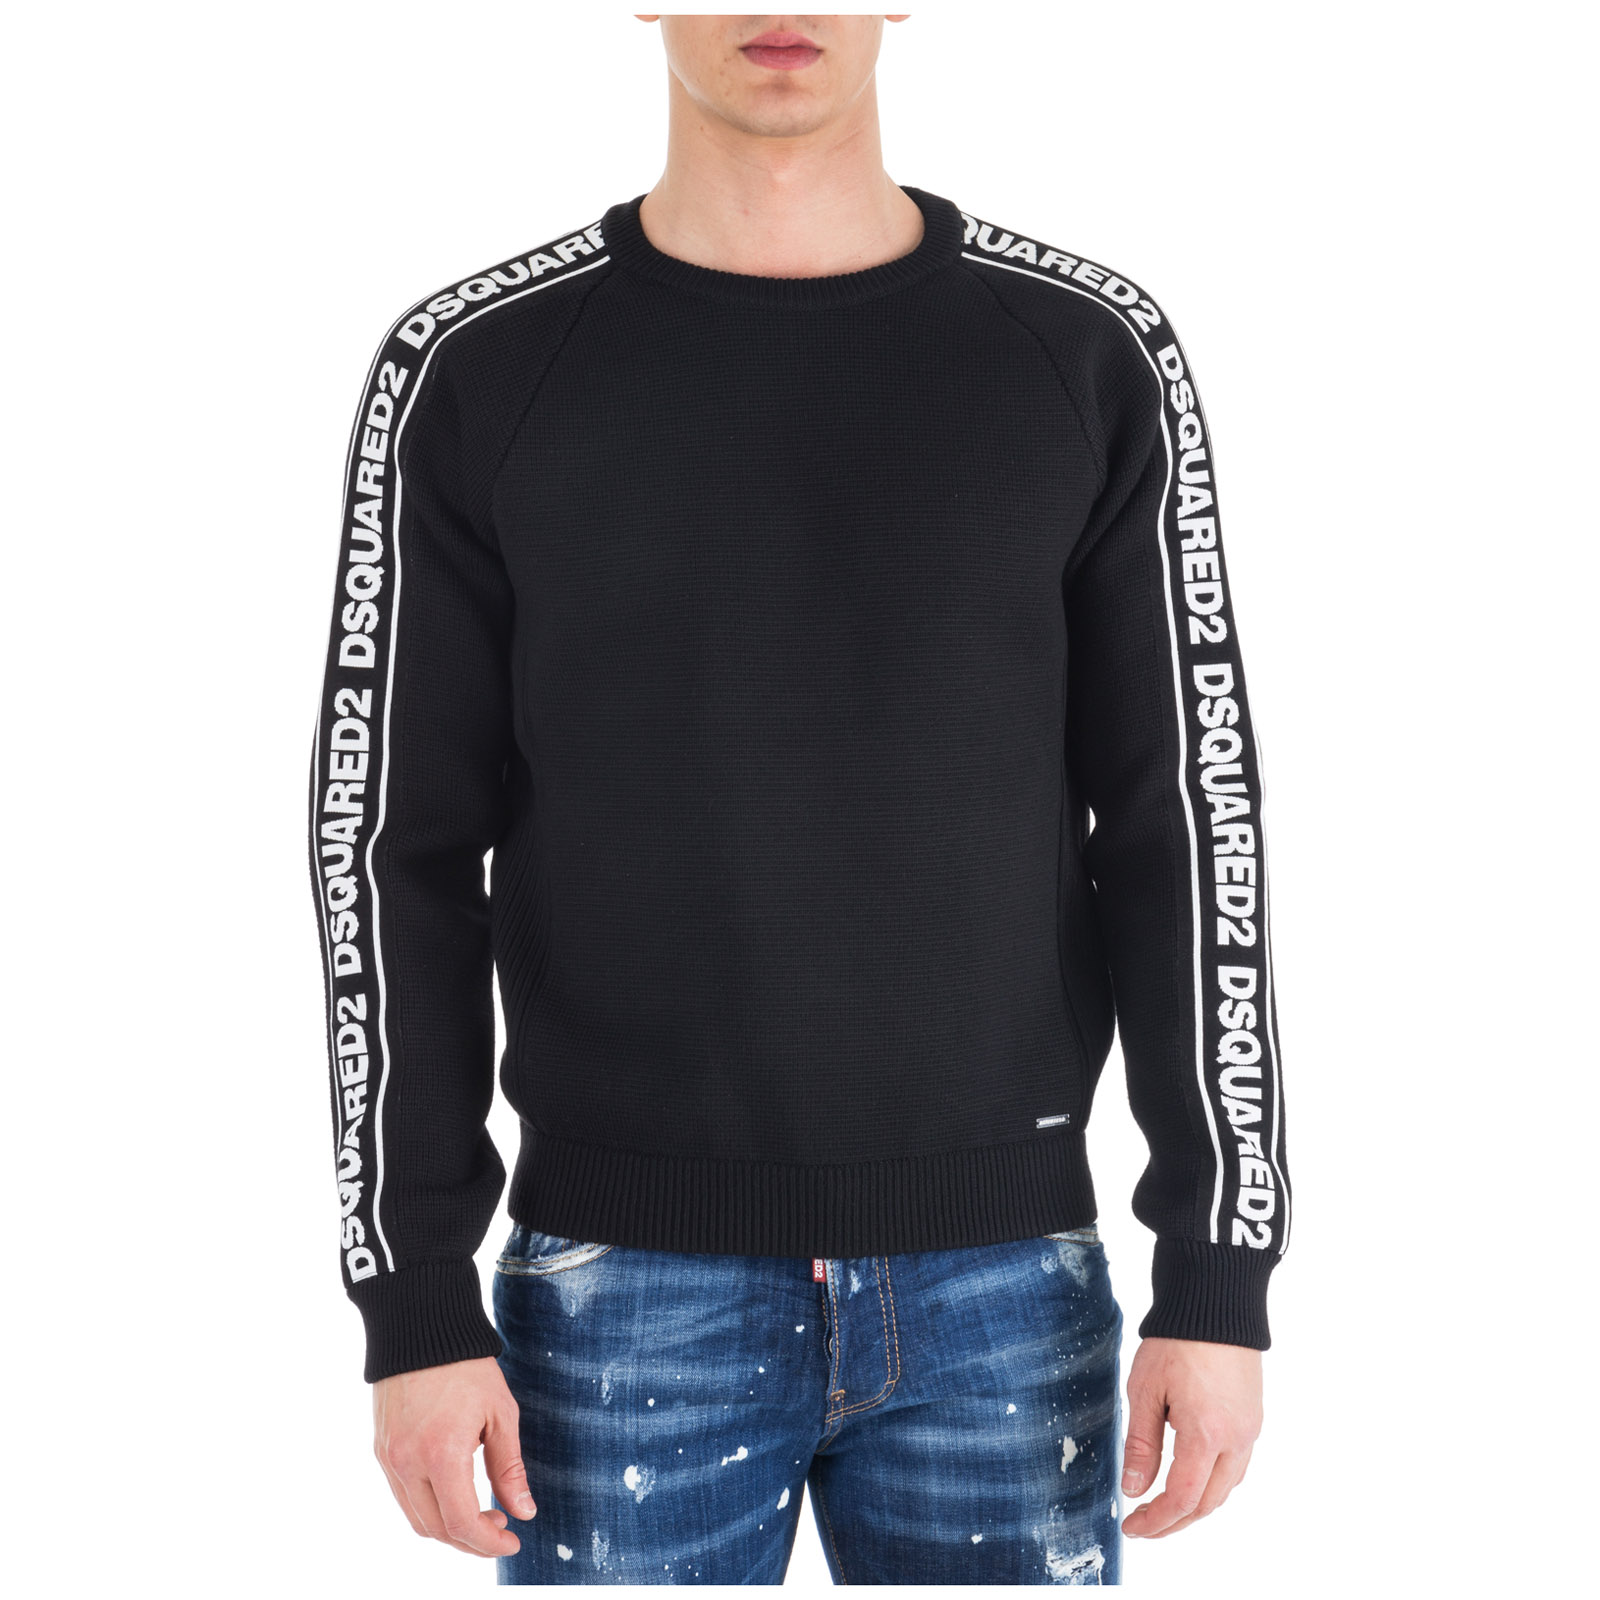 mens dsquared jumpers